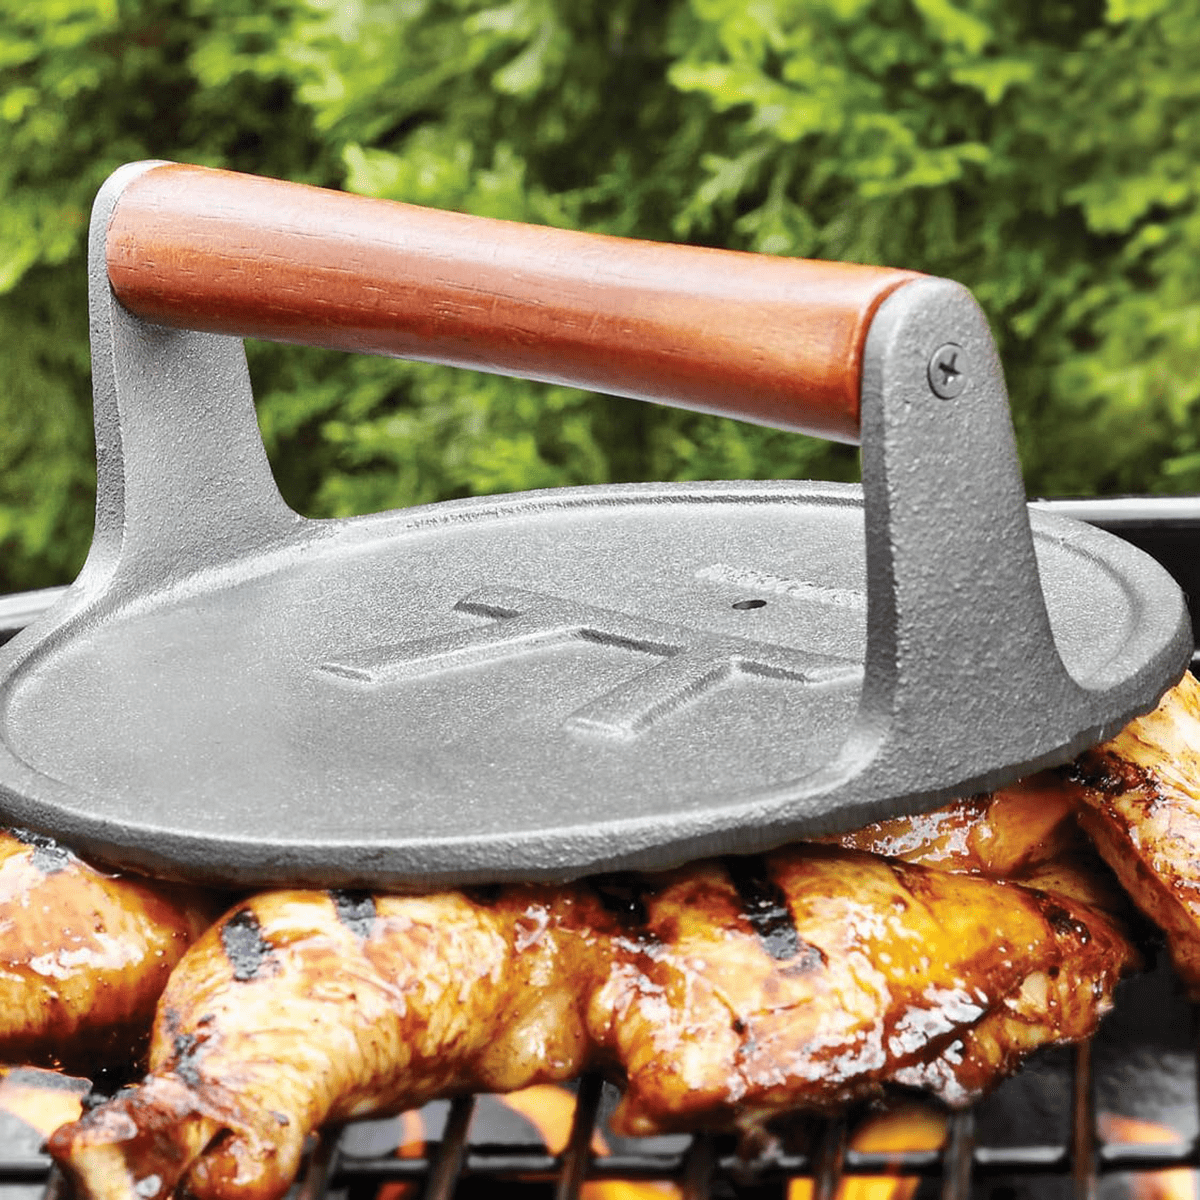 https://www.tasteofhome.com/wp-content/uploads/2023/05/outset-cast-iron-grill-press-via-bbqguys.com-ecomm.png?fit=700%2C700